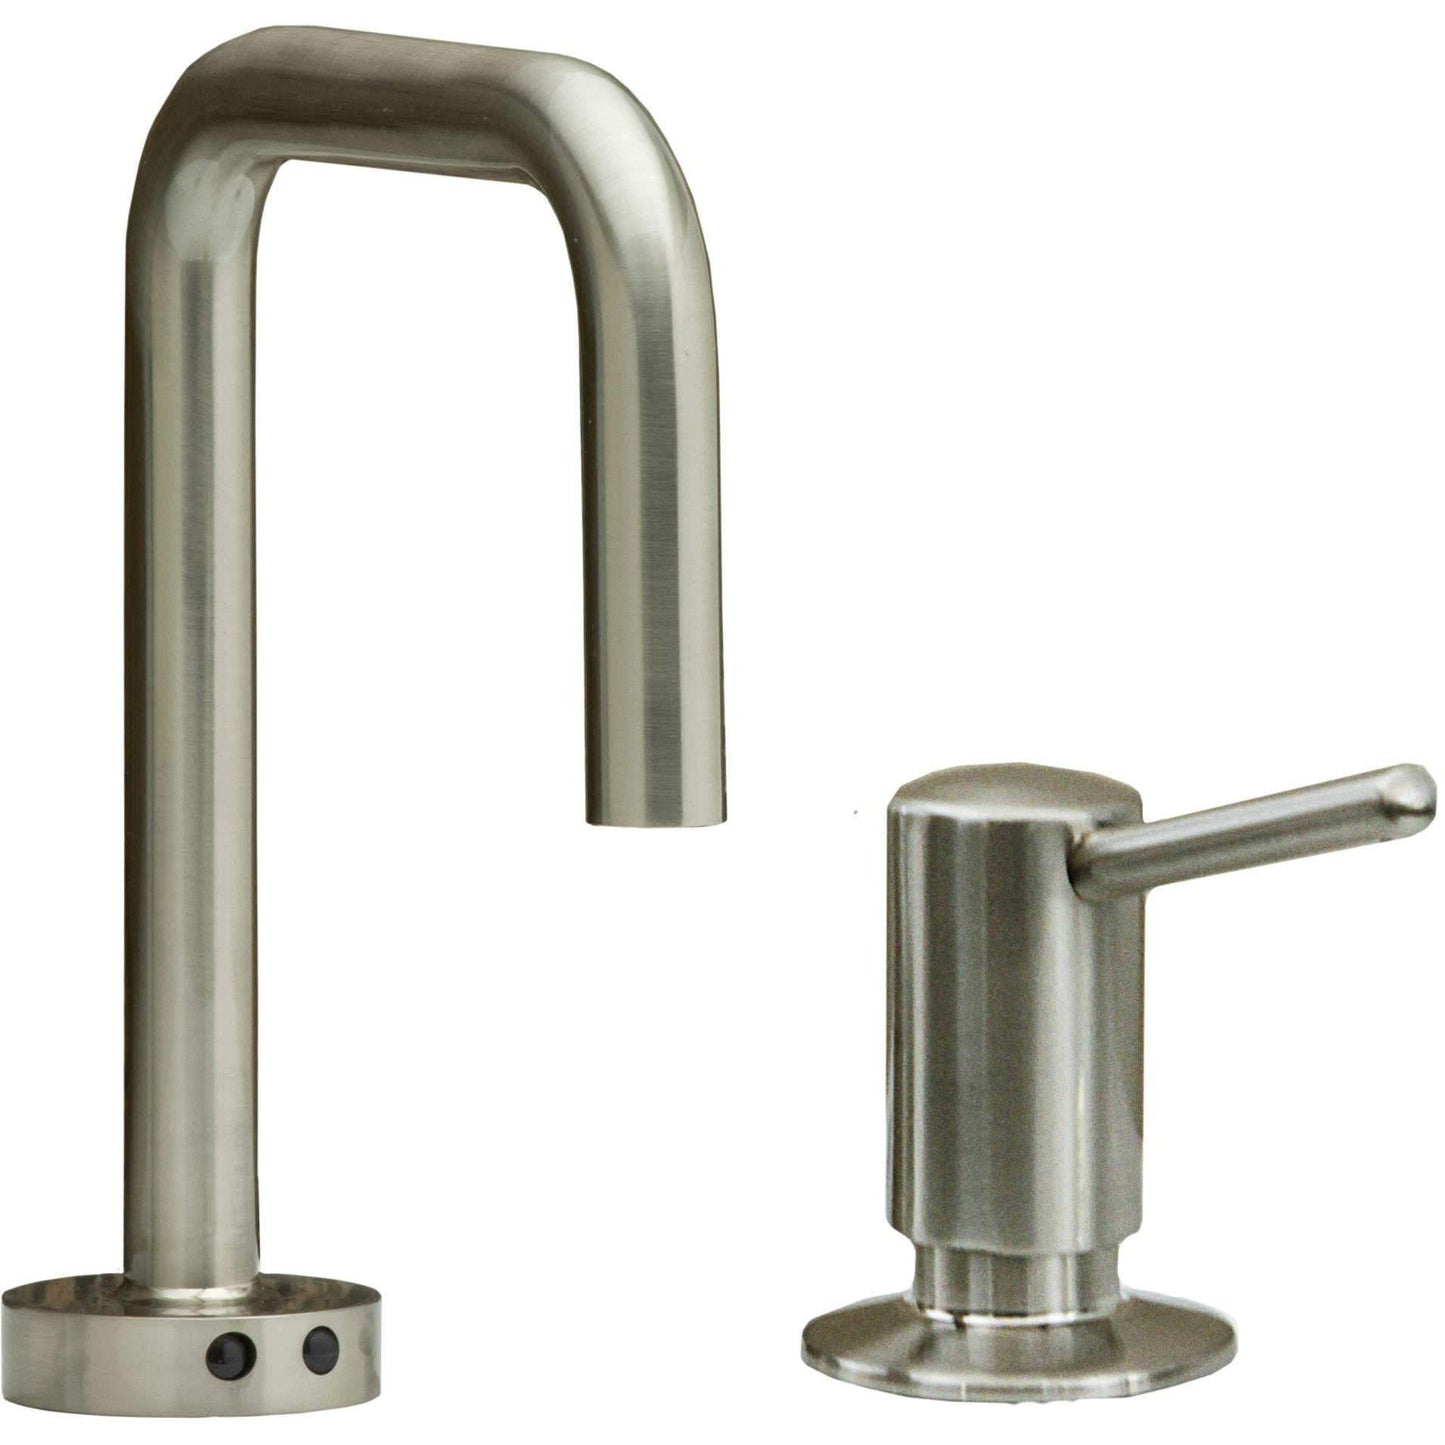 Ultra Modern Automatic Faucet with Soap Dispenser FA400-1200S